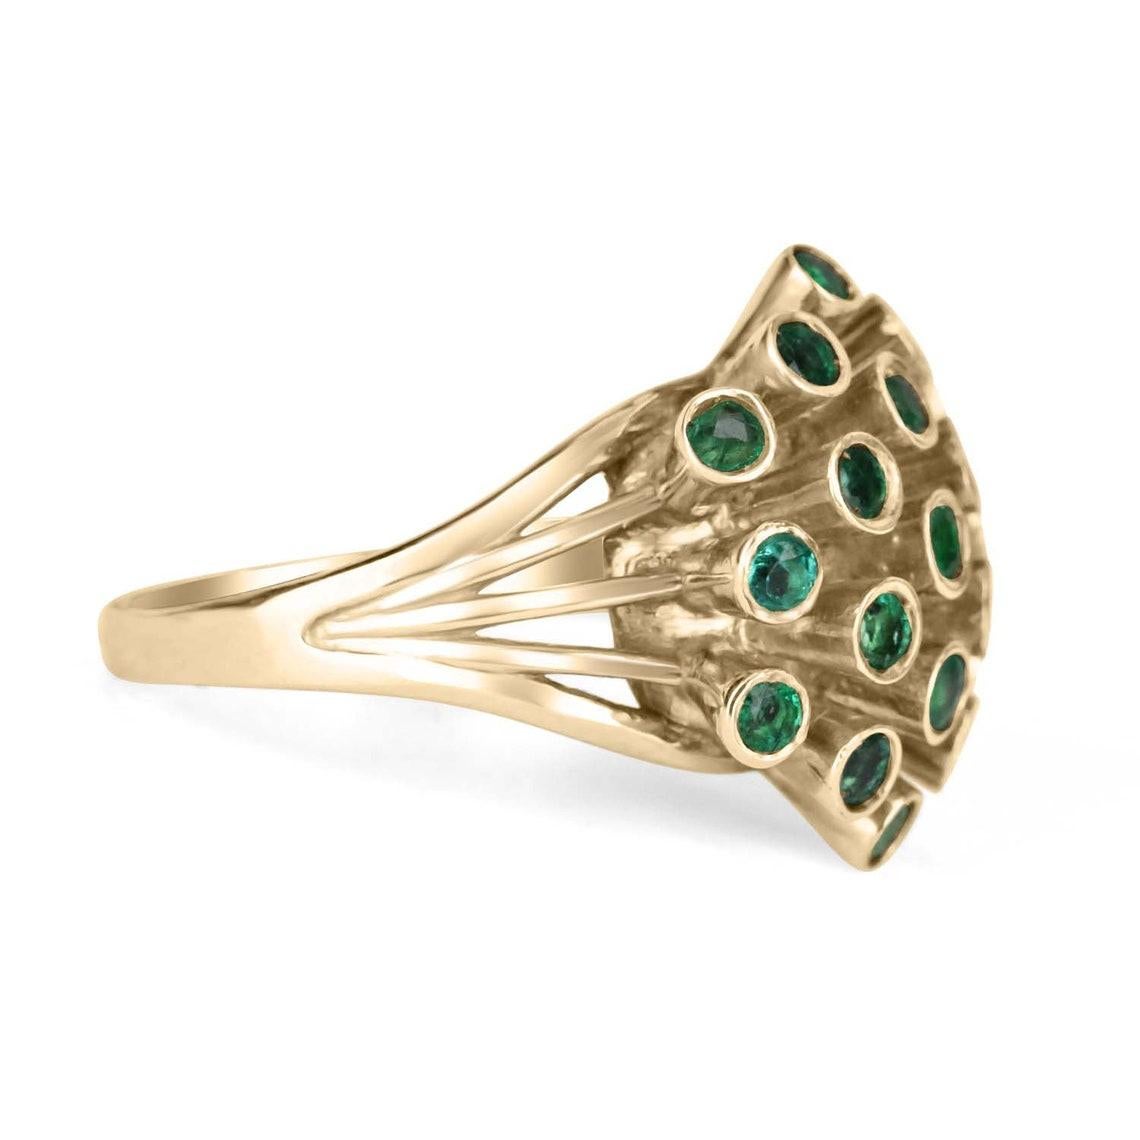 This is our all-new, and one-of-a-kind Colombian Emerald COVID-19 ring. There are 19 beautiful medium-dark green stones totaling approximately 1.90tcw, set in a 14k yellow gold cluster setting. Inspired by one of our lovely customers who was